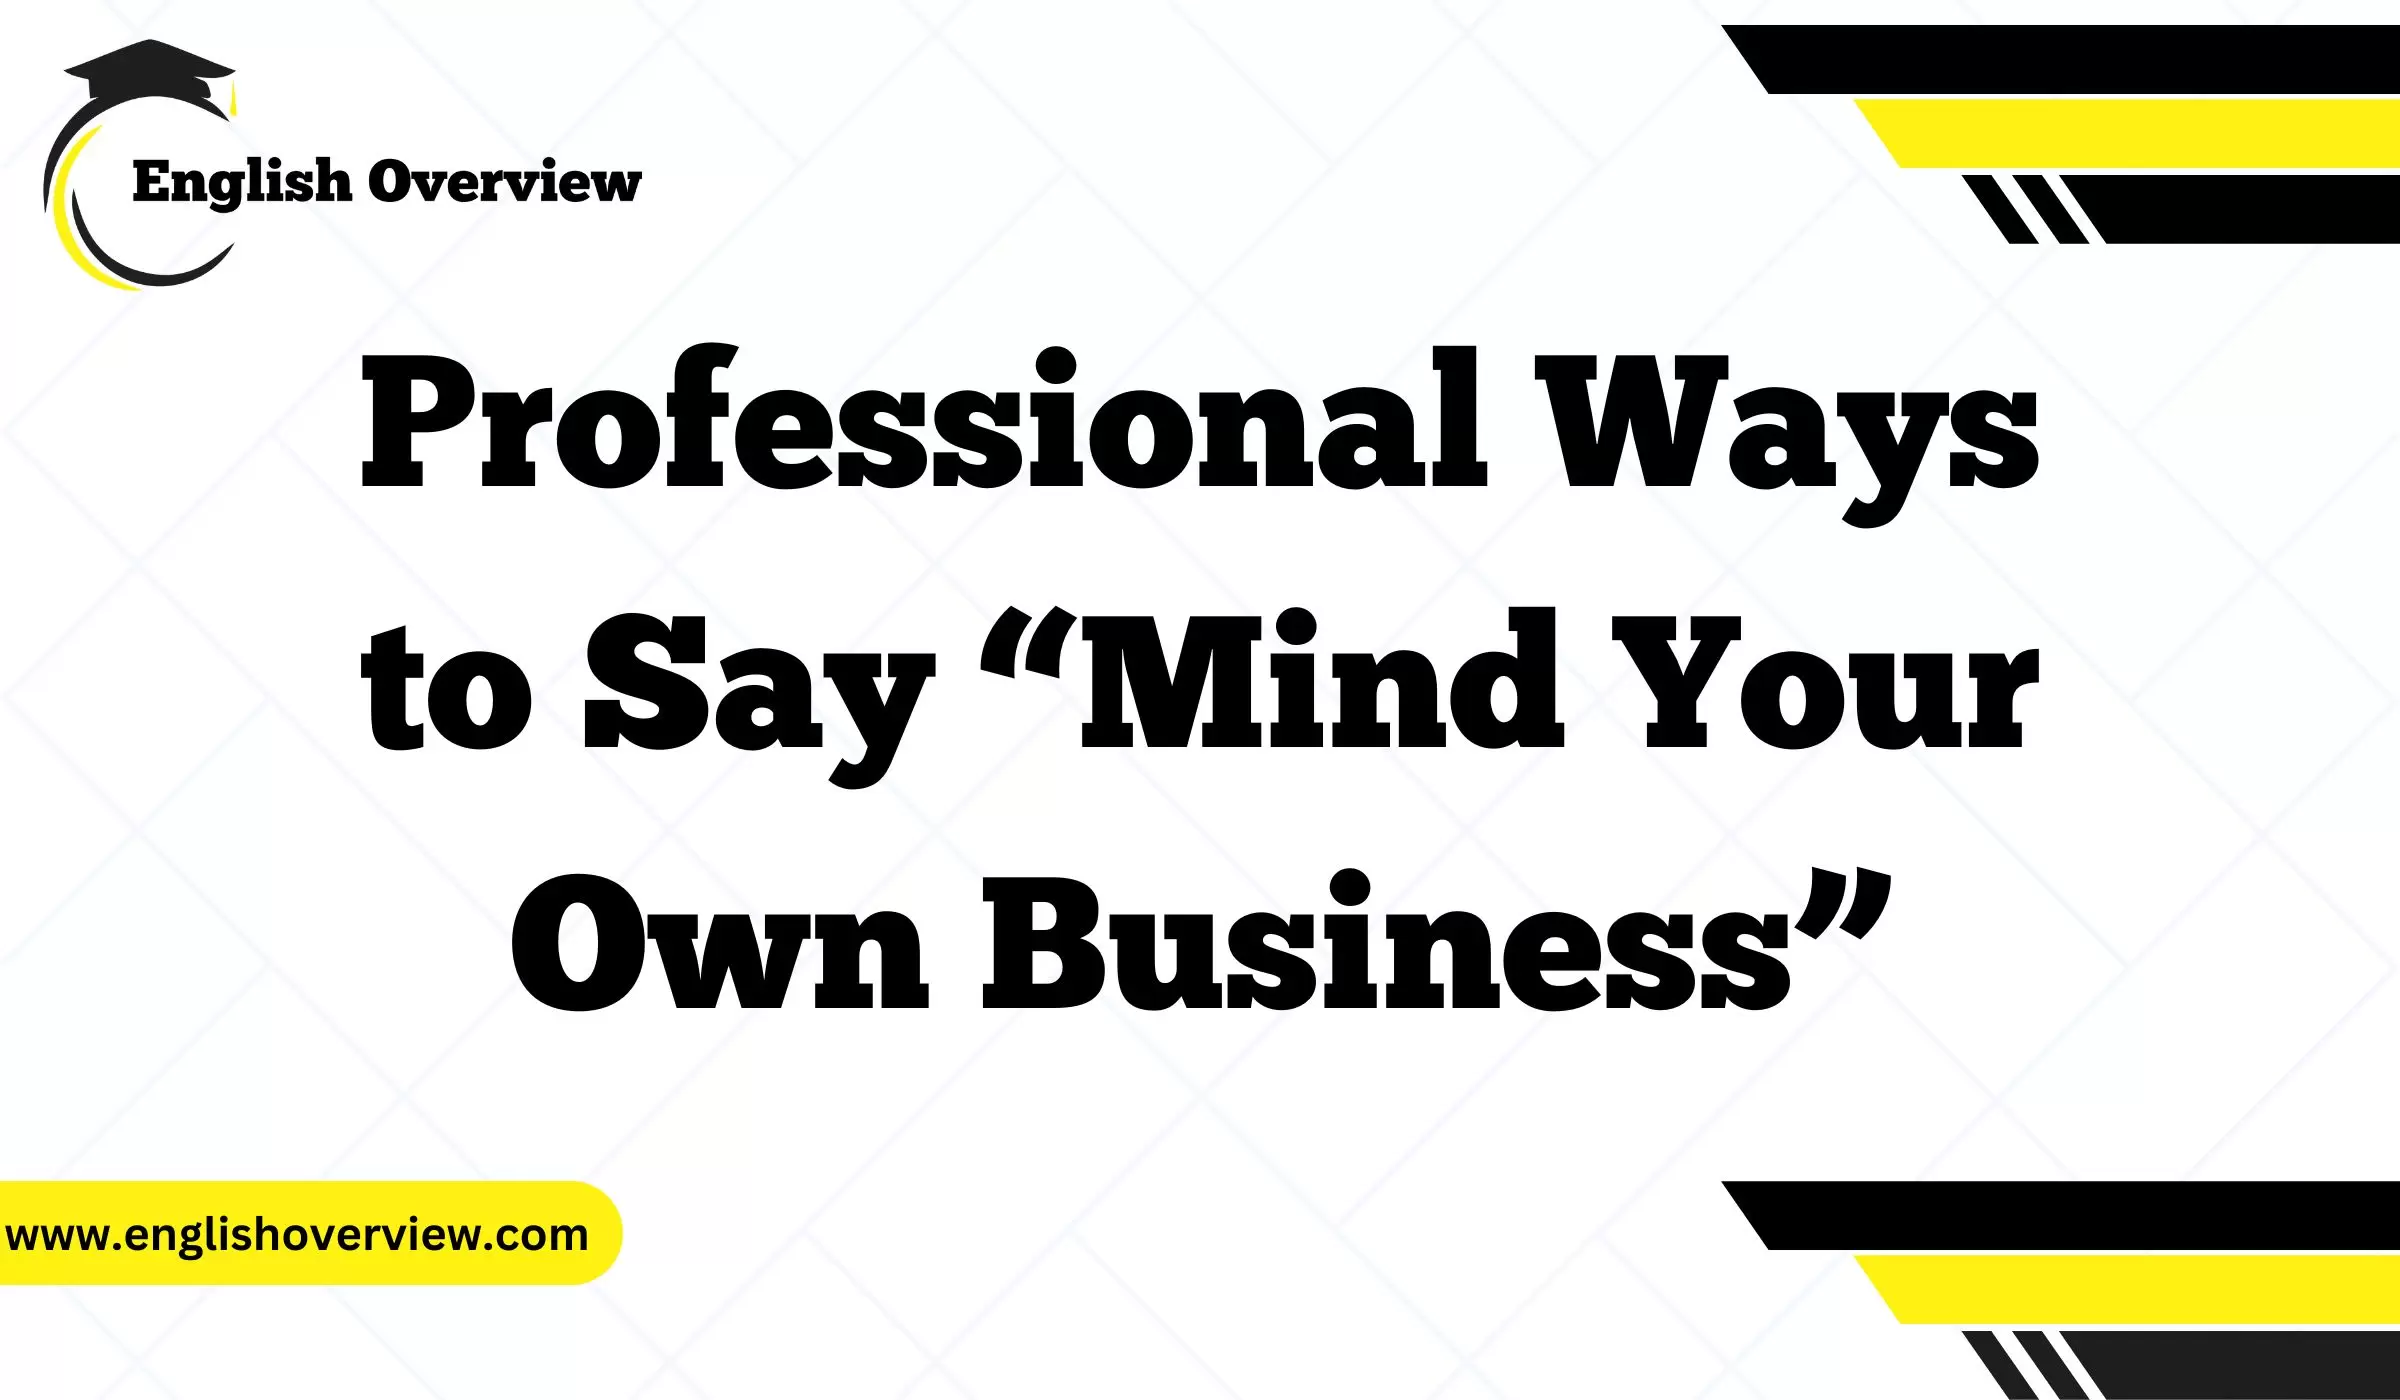 Professional Ways to Say “Mind Your Own Business”